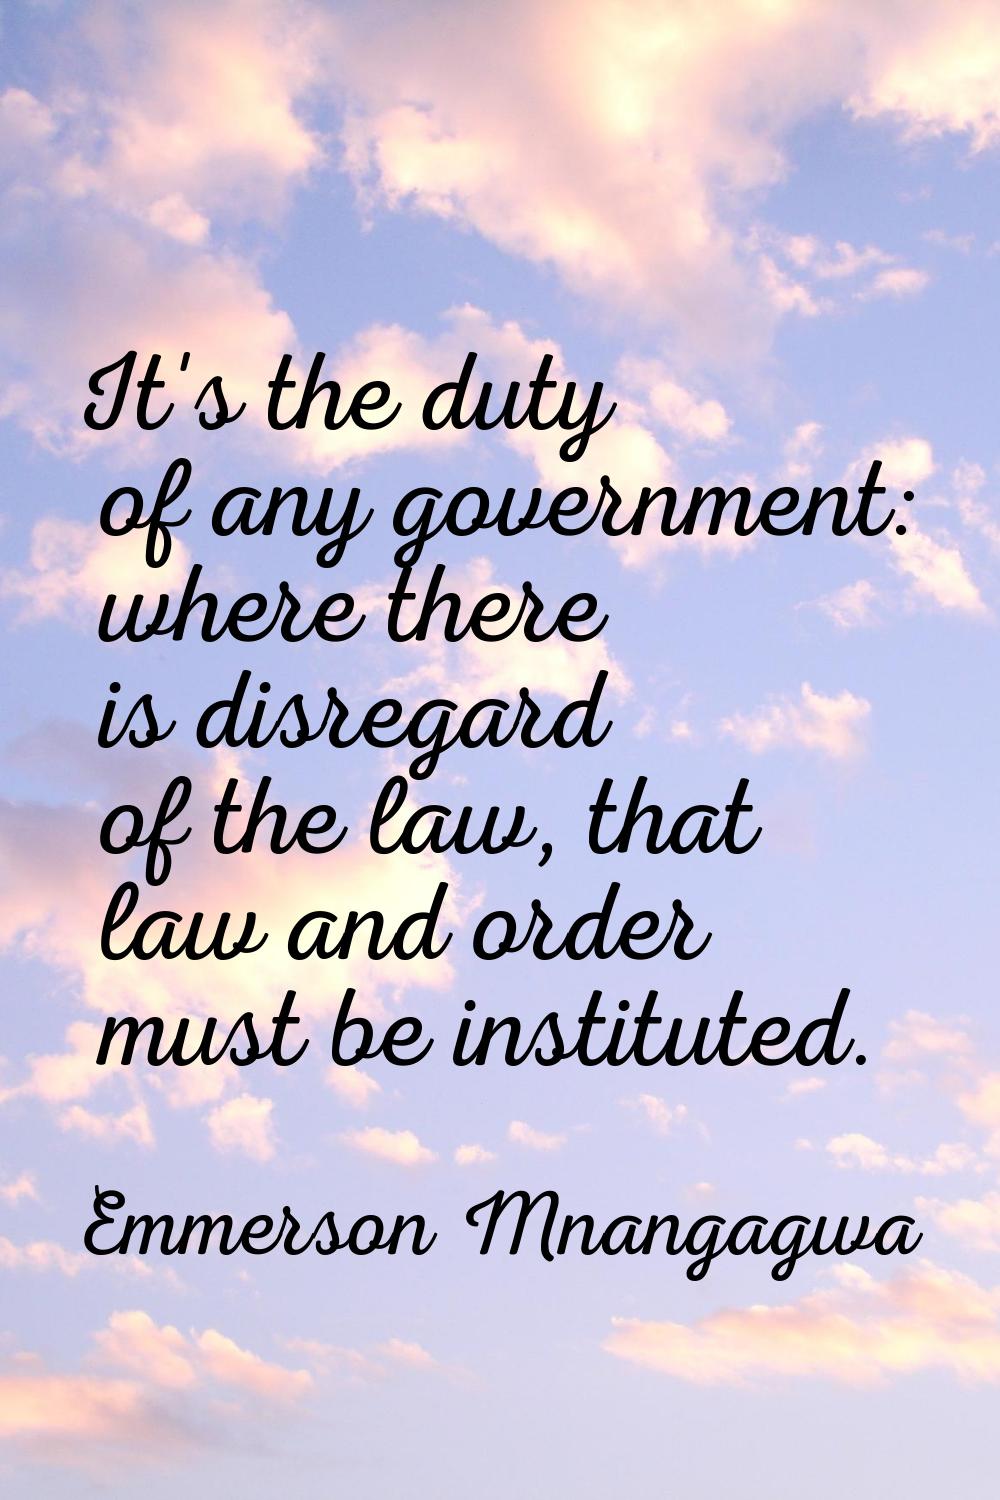 It's the duty of any government: where there is disregard of the law, that law and order must be in